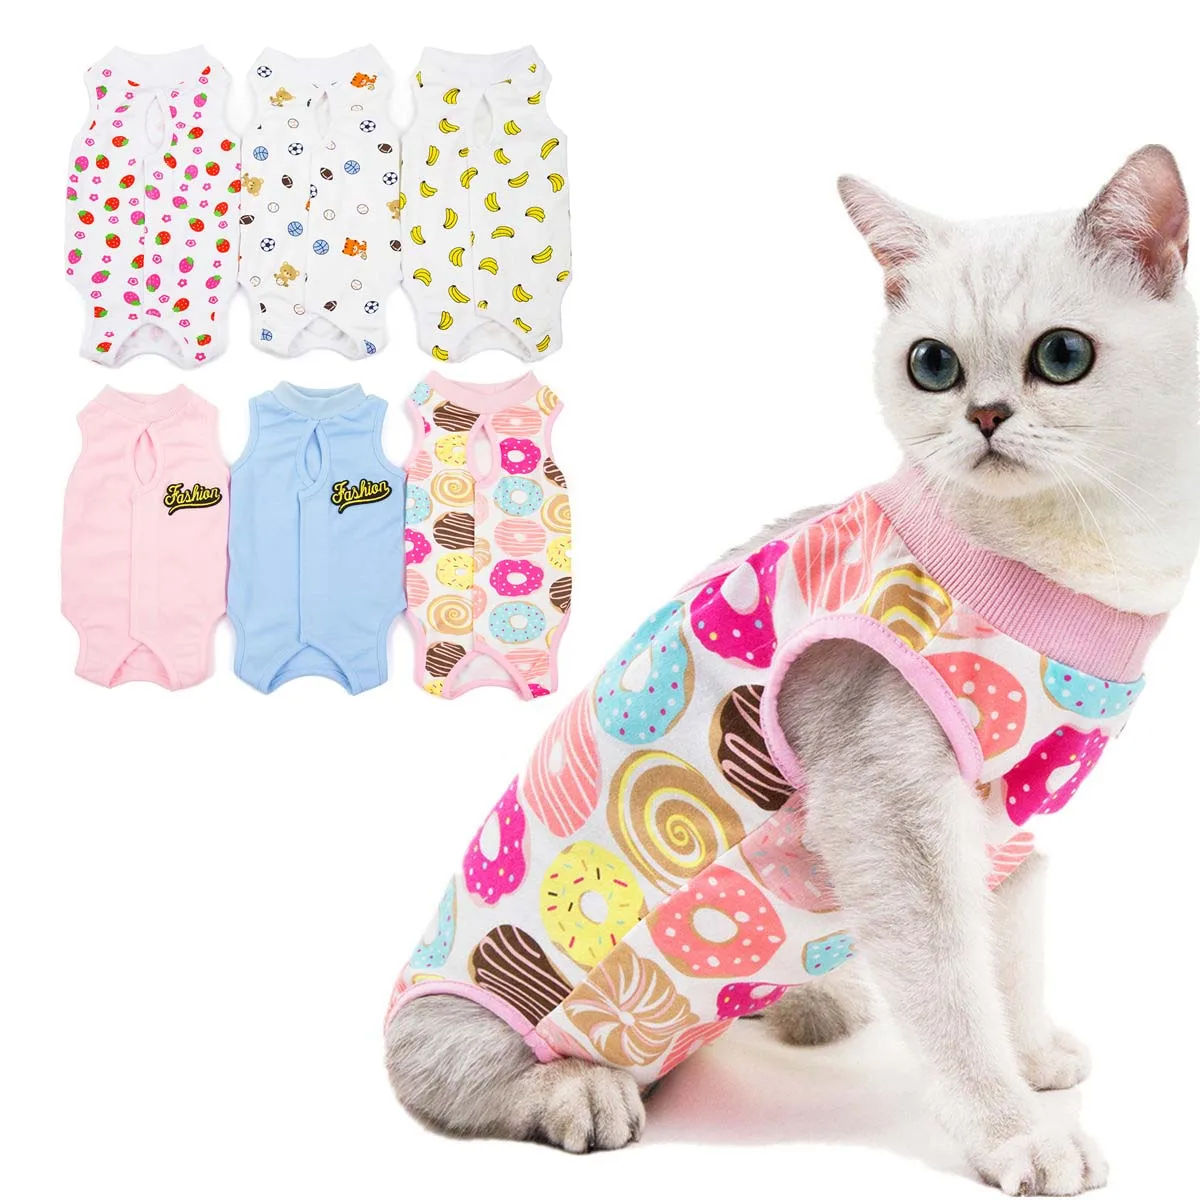 Cotton Cat Clothes Recovery Suit Cotton Cat Weaning Bodysuit After Surgery Wear Anti Licking Wounds for Small Dogs Female Cat stock clean sphynx cat clothes thin baby soft cotton hairless cat clothes cat pajamas kitten clothes cat clothes cat fashion